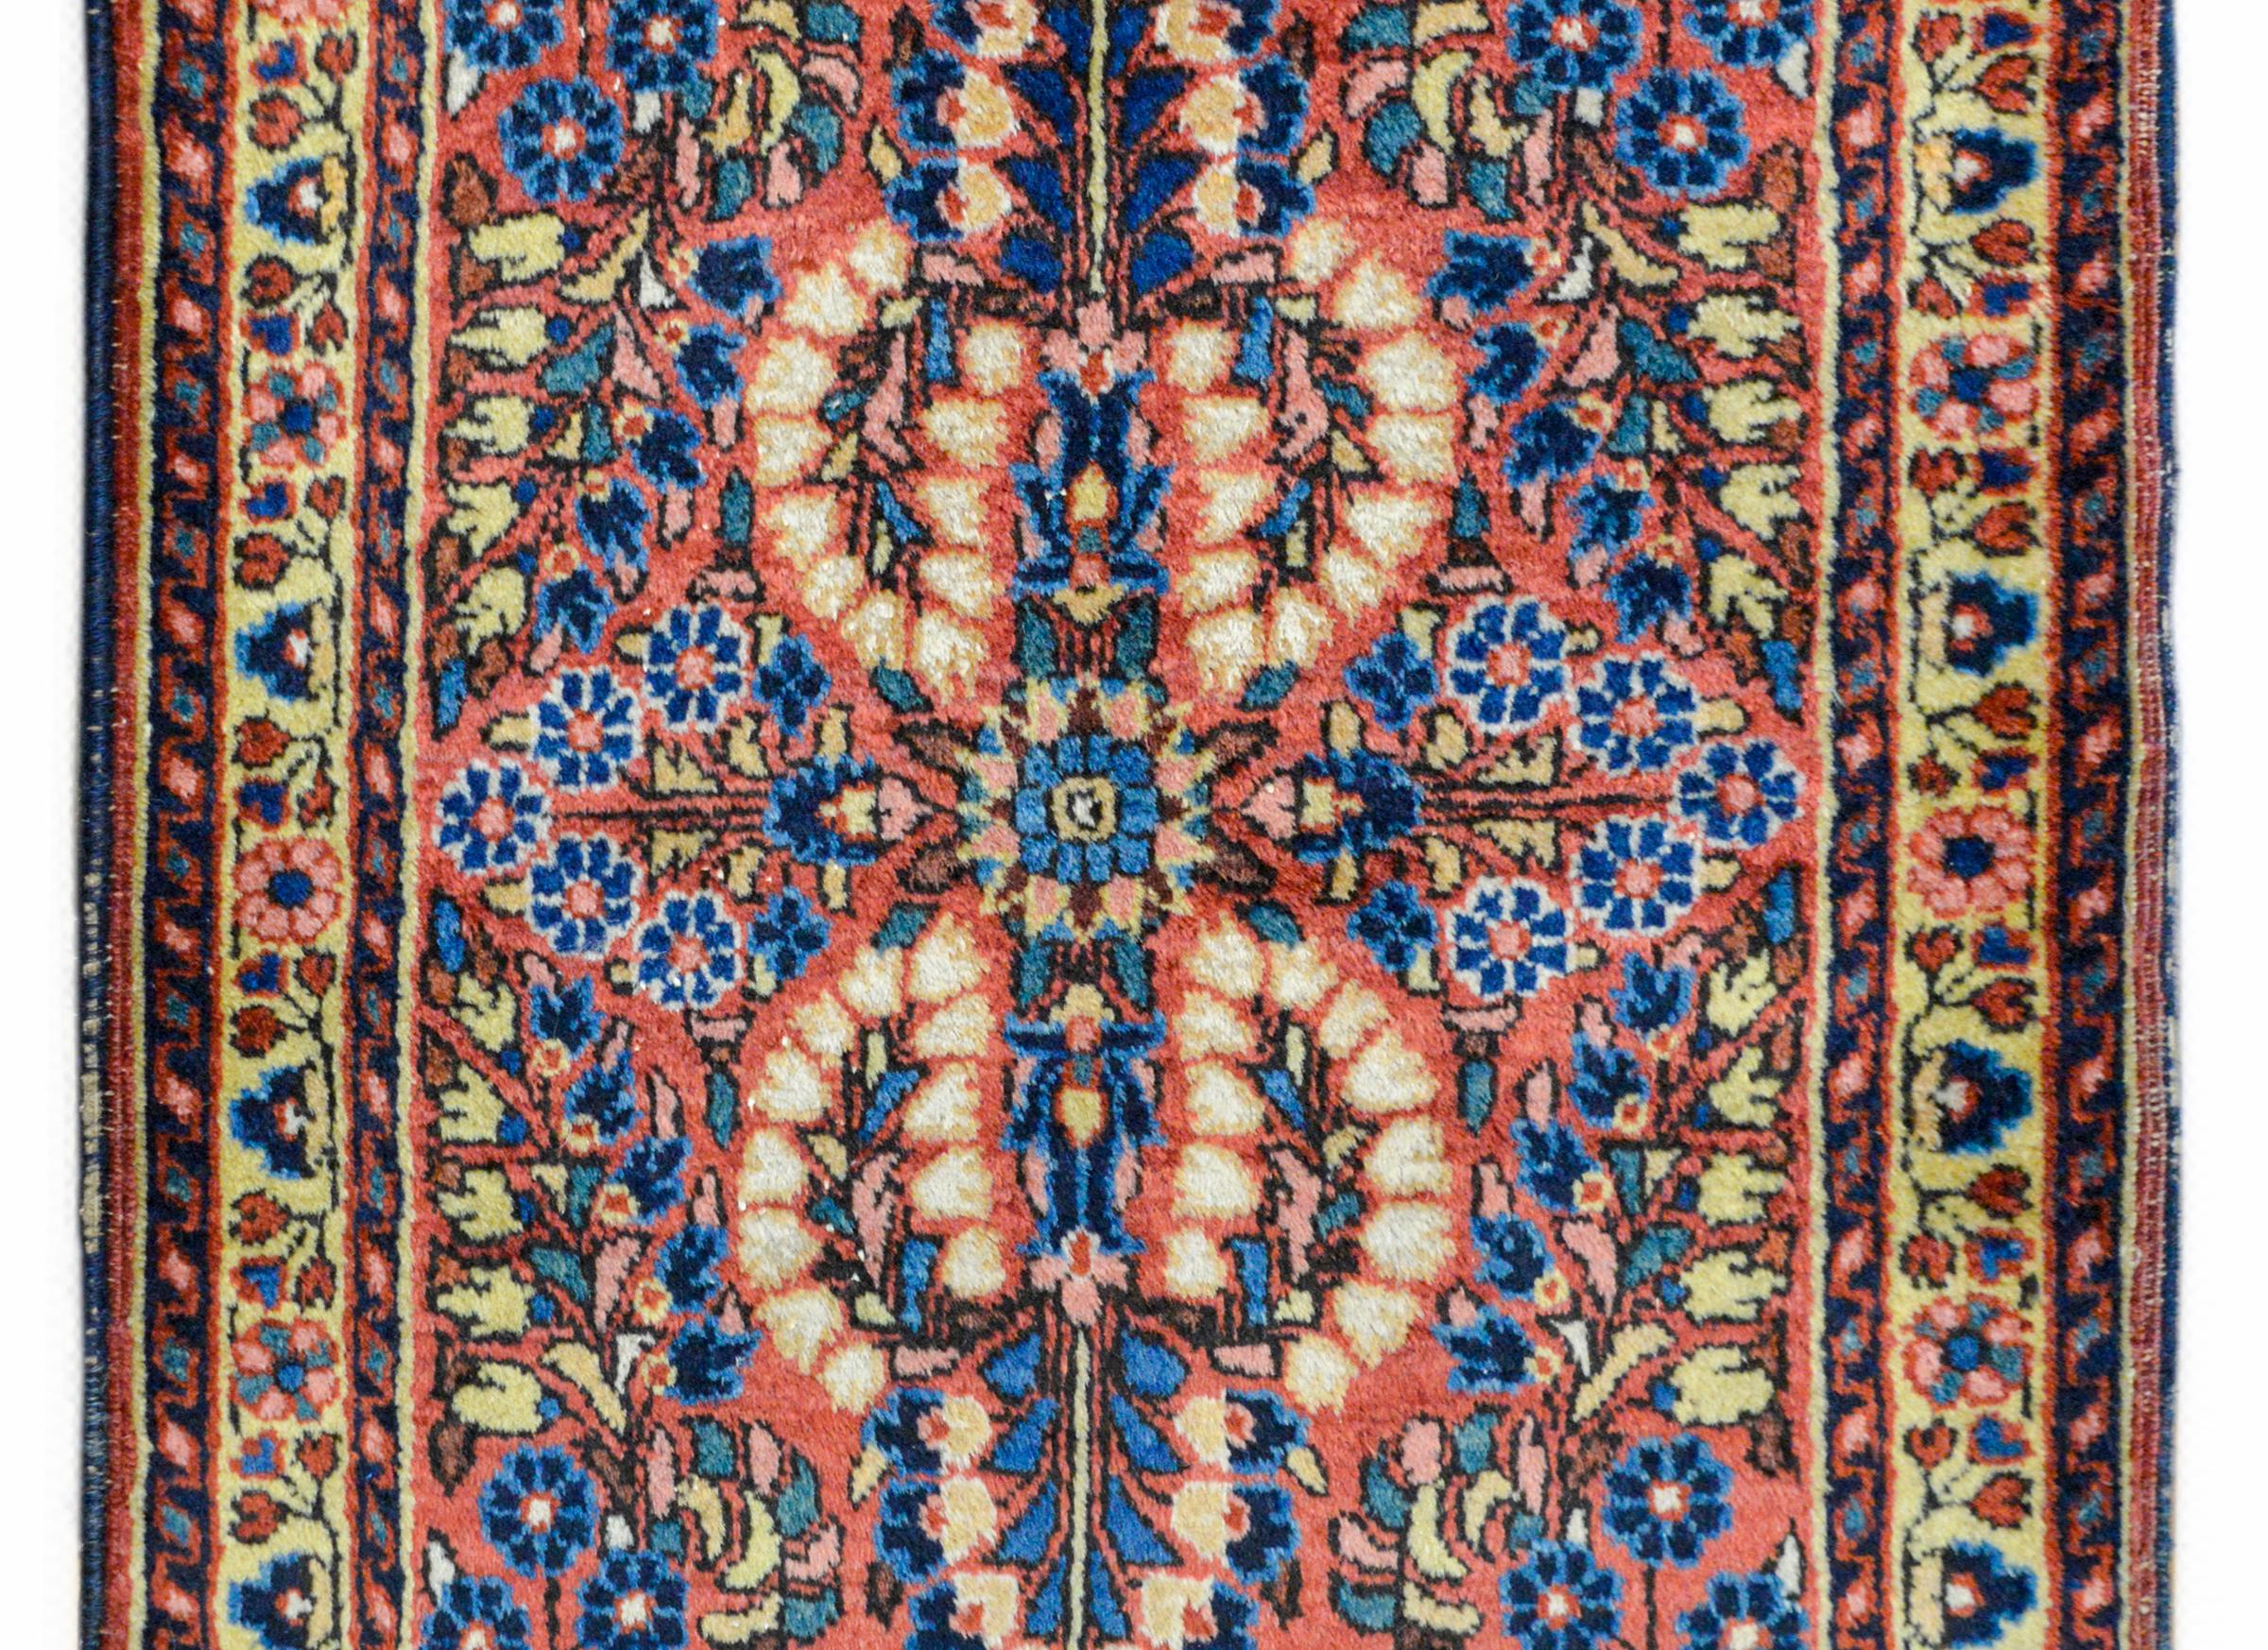 A charming early 20th century Persian Sarouk rug with a mirrored floral pattern woven in myriad colors against a coral colored background, and surrounded by a border containing a wide floral pattered central stripe flanked by a pair of petite floral